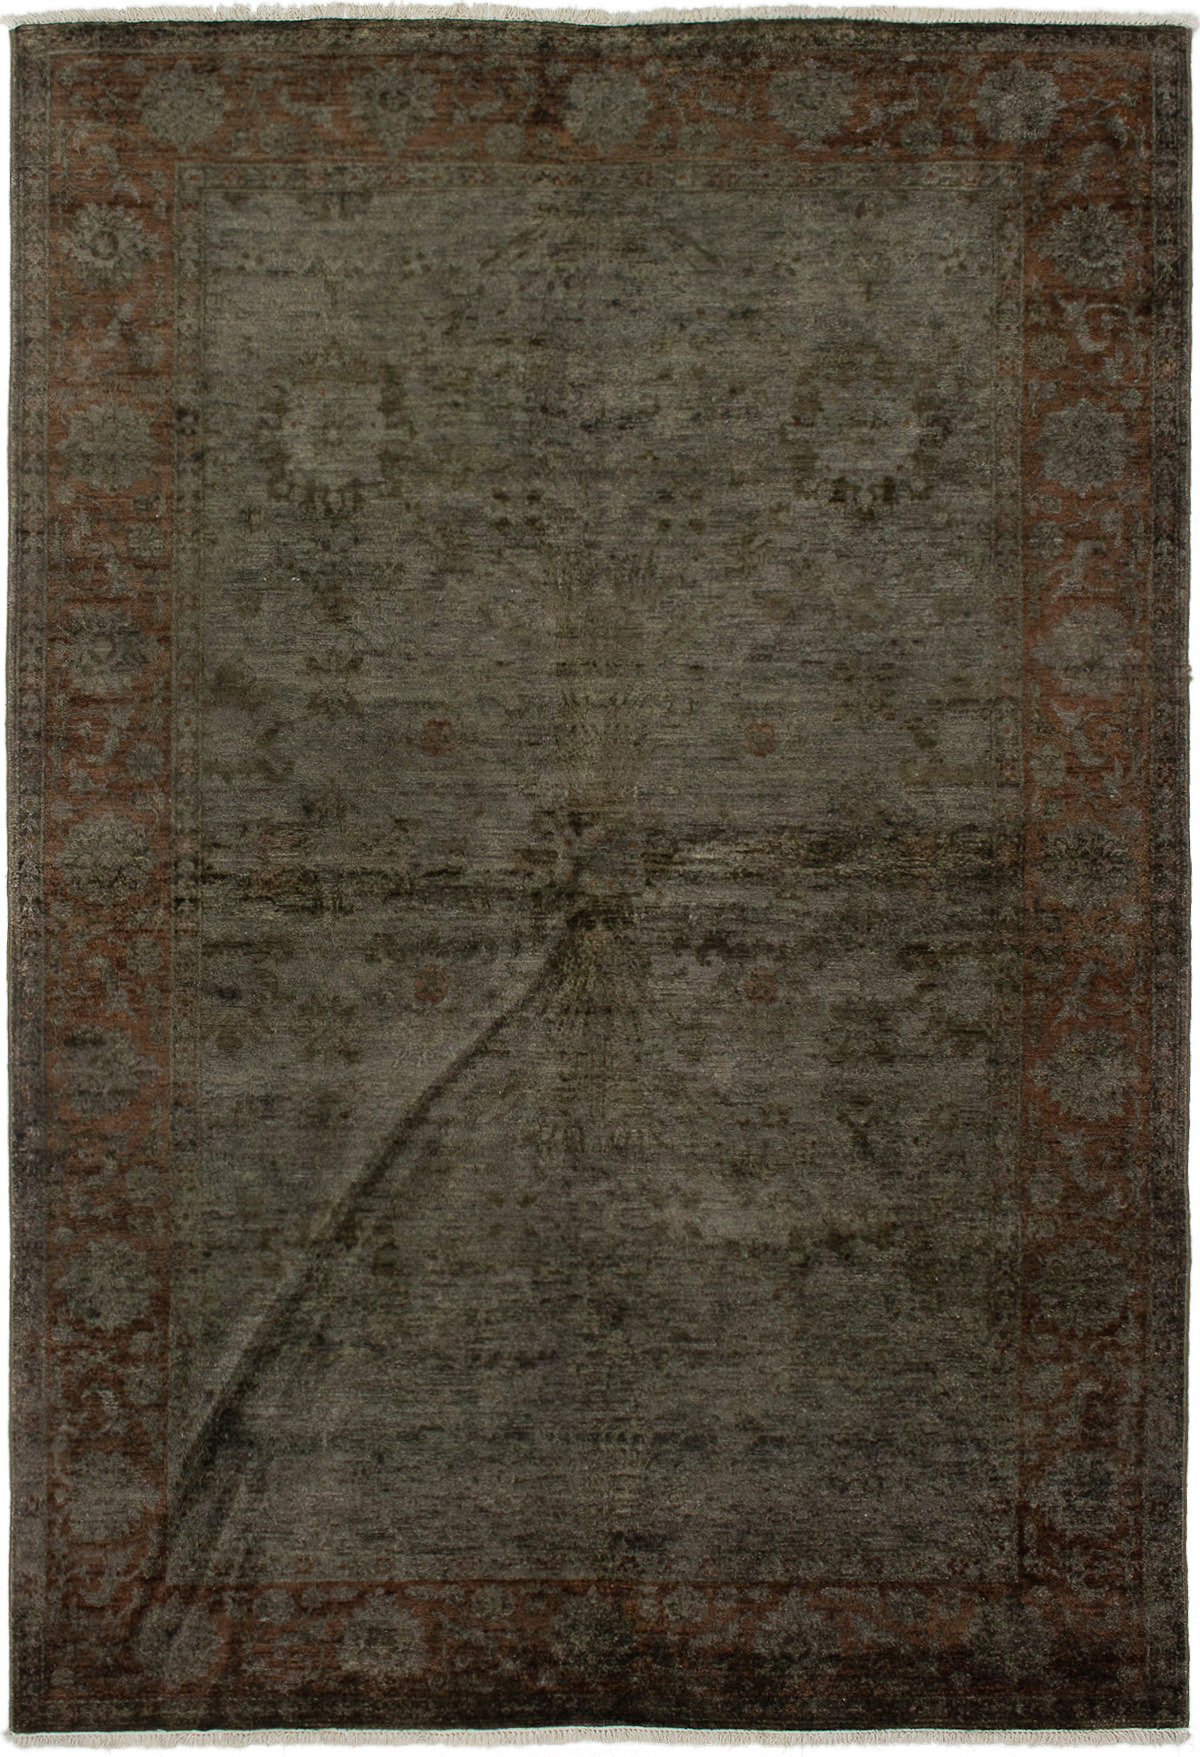 Hand-knotted Color transition Dark Brown Wool Rug 5'9" x 8'10" Size: 5'9" x 8'10"  